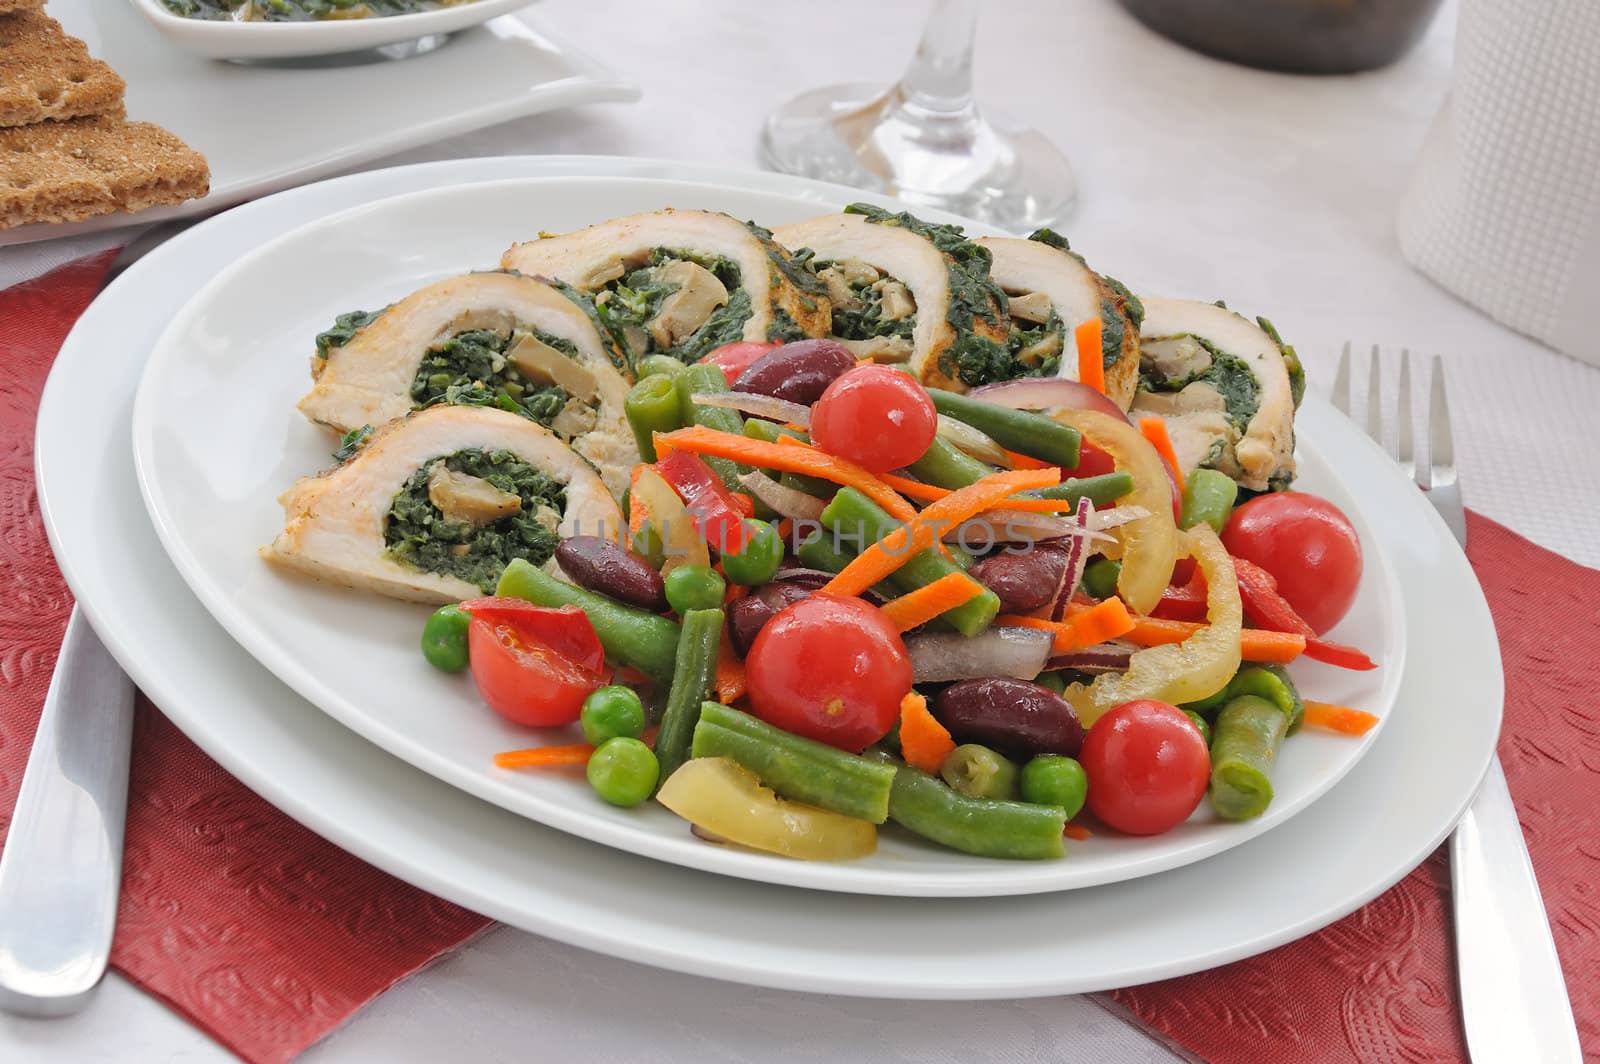 Sliced chicken roll with spinach and mushrooms garnished with vegetables